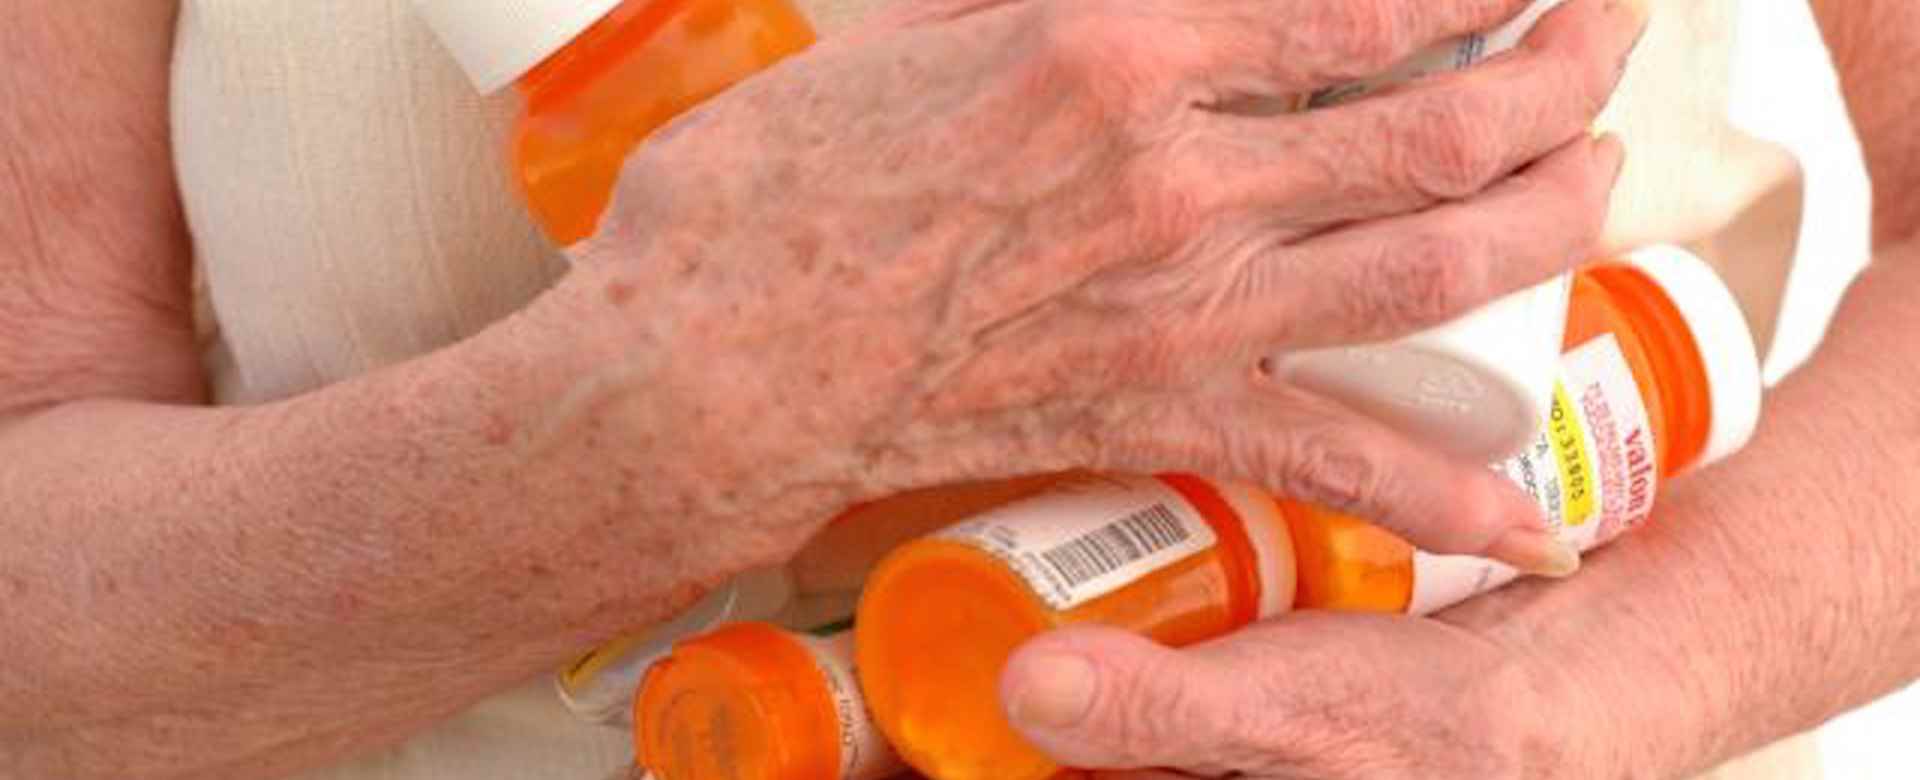 Polypharmacy Affects Quality of Care for many Seniors